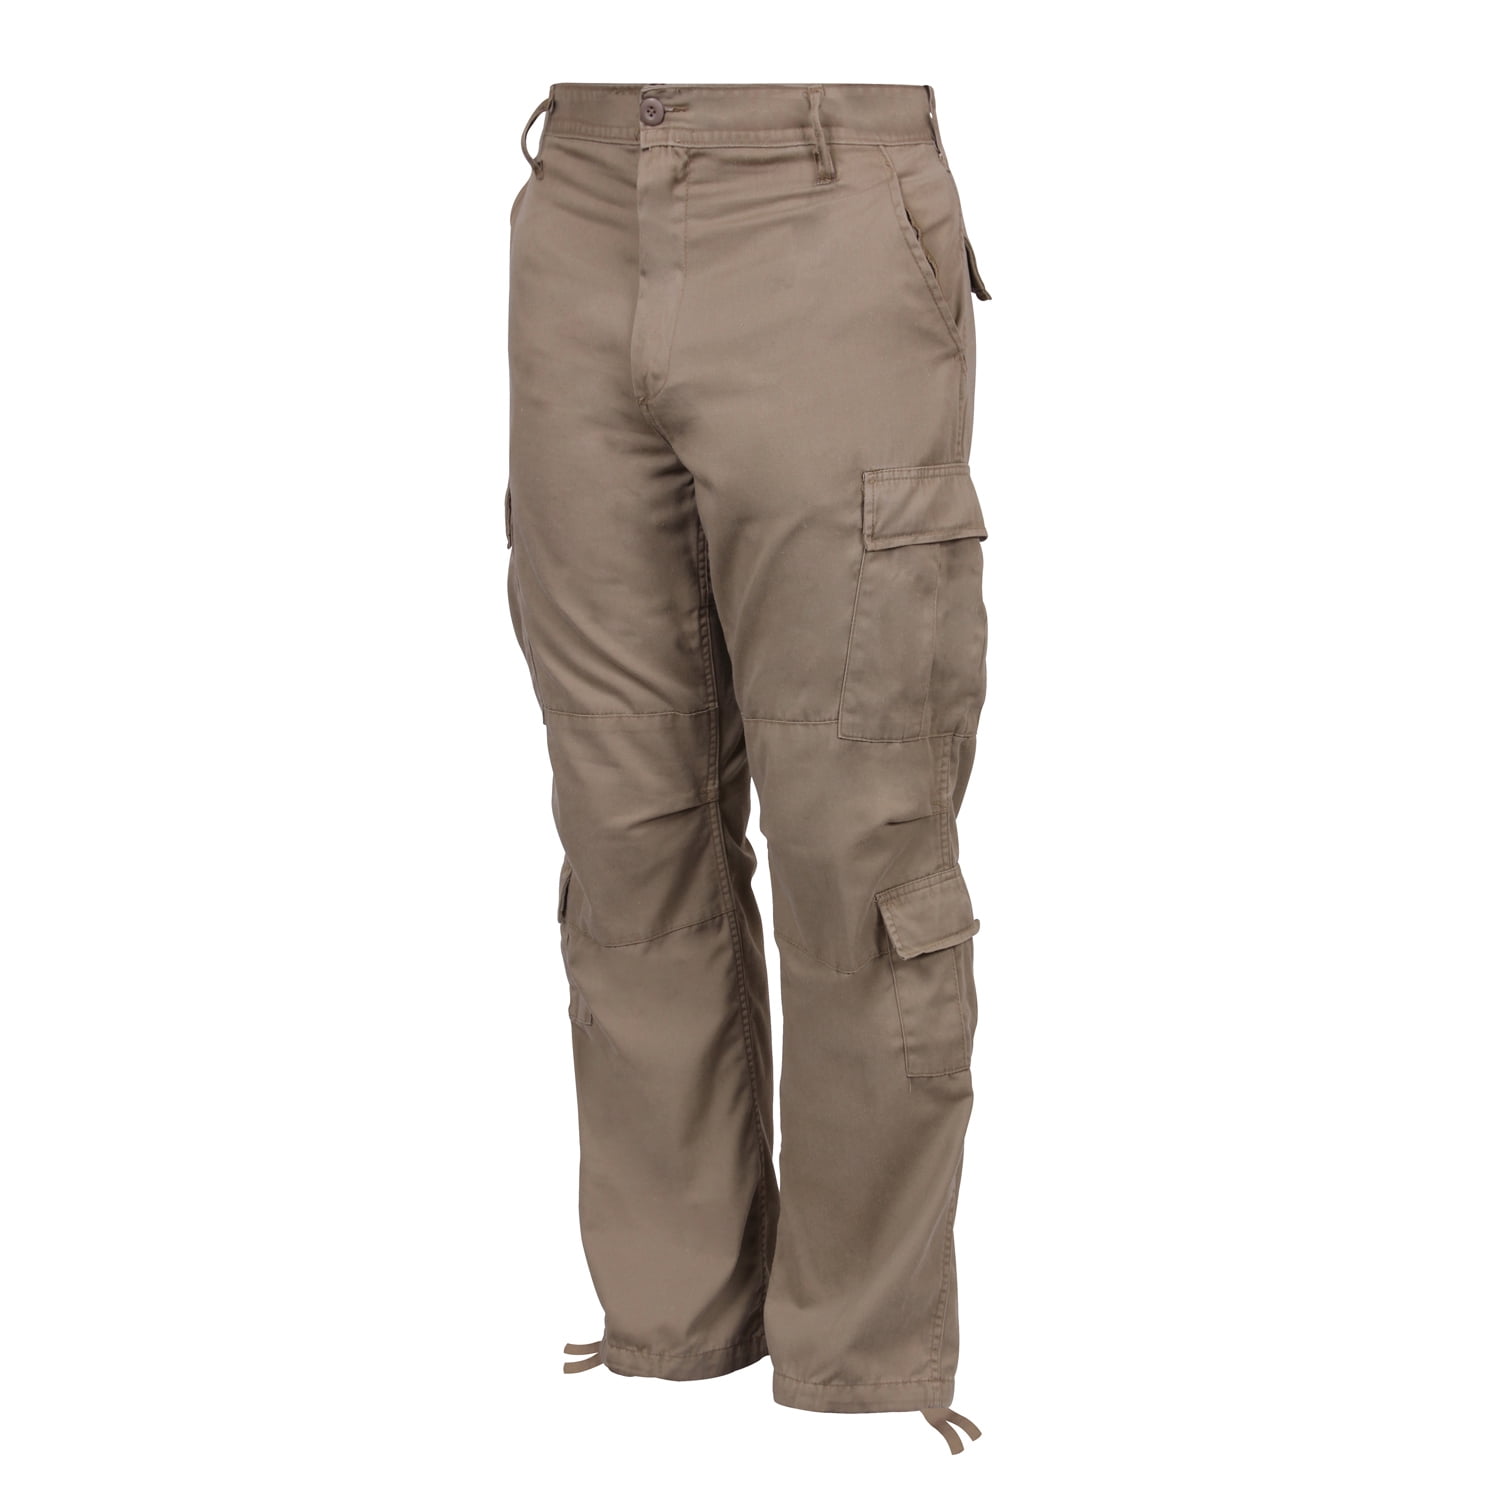 Rothco - Vintage Paratrooper Cargo Fatigue Pants - Subdued Digital